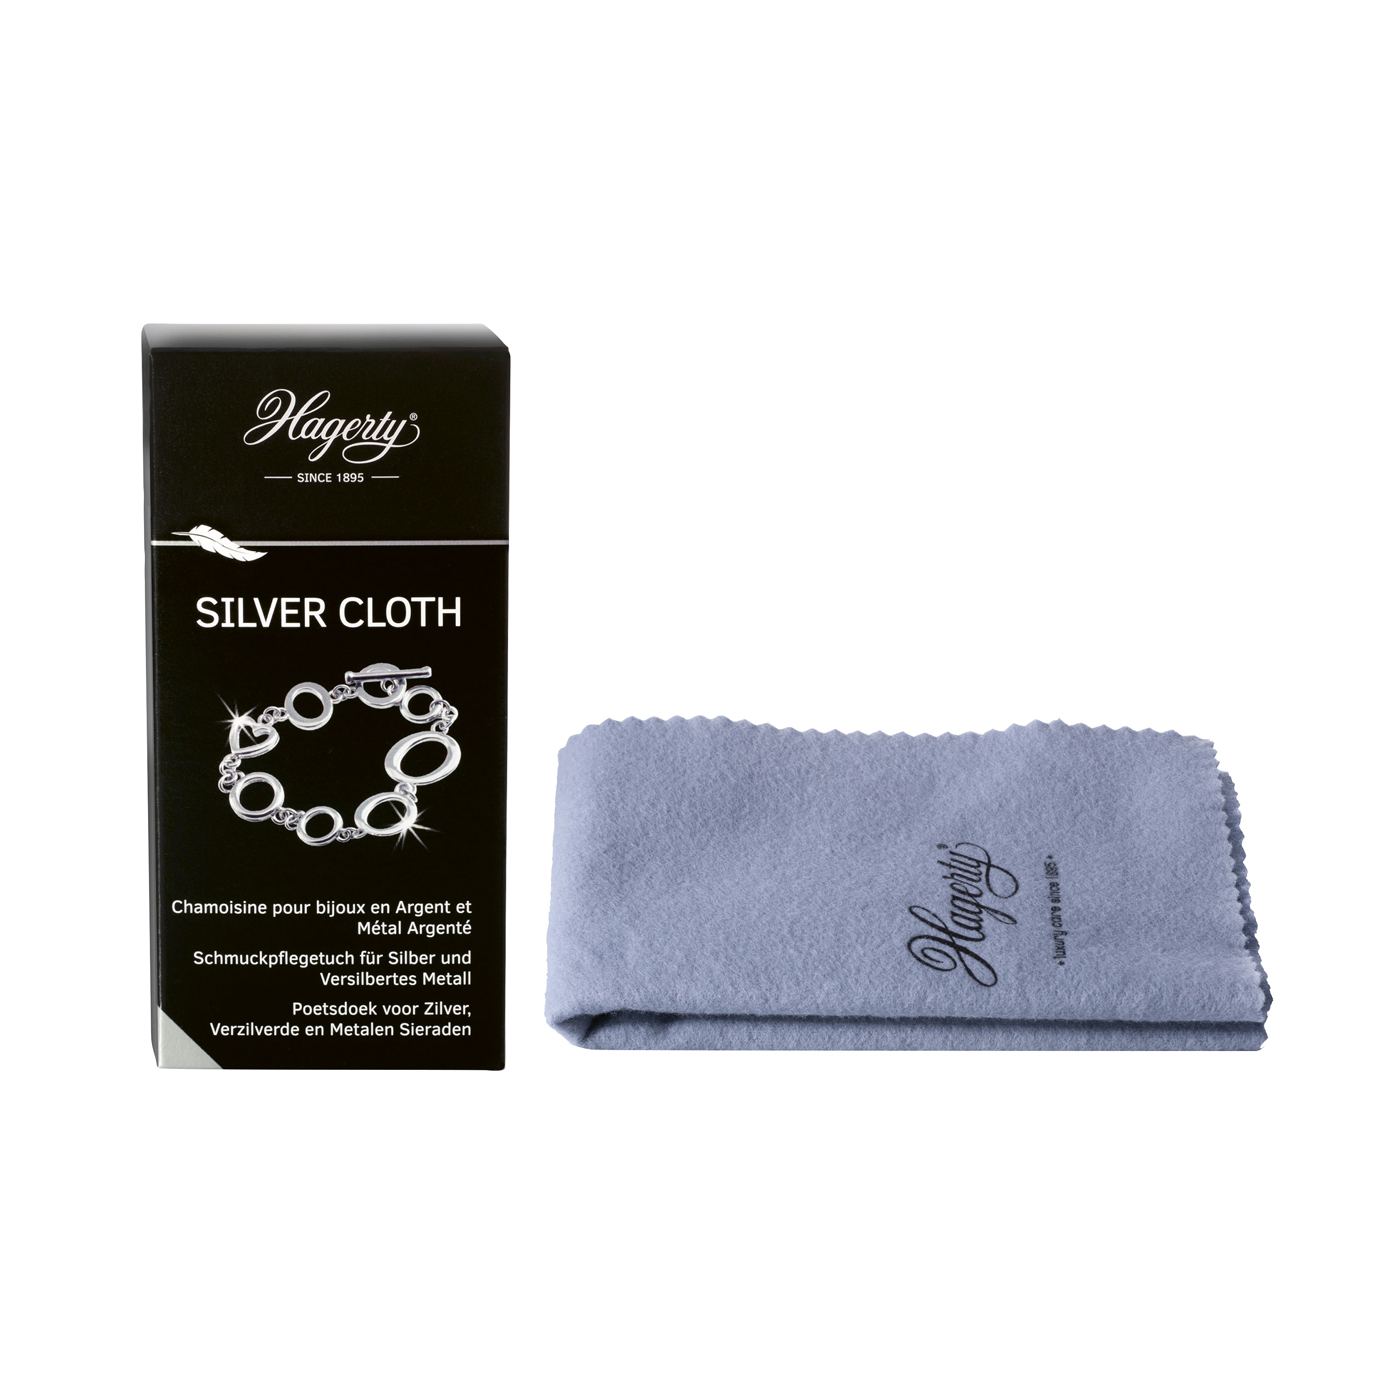 Hagerty Silver Jewellery Cleaning Cloth - 1 piece